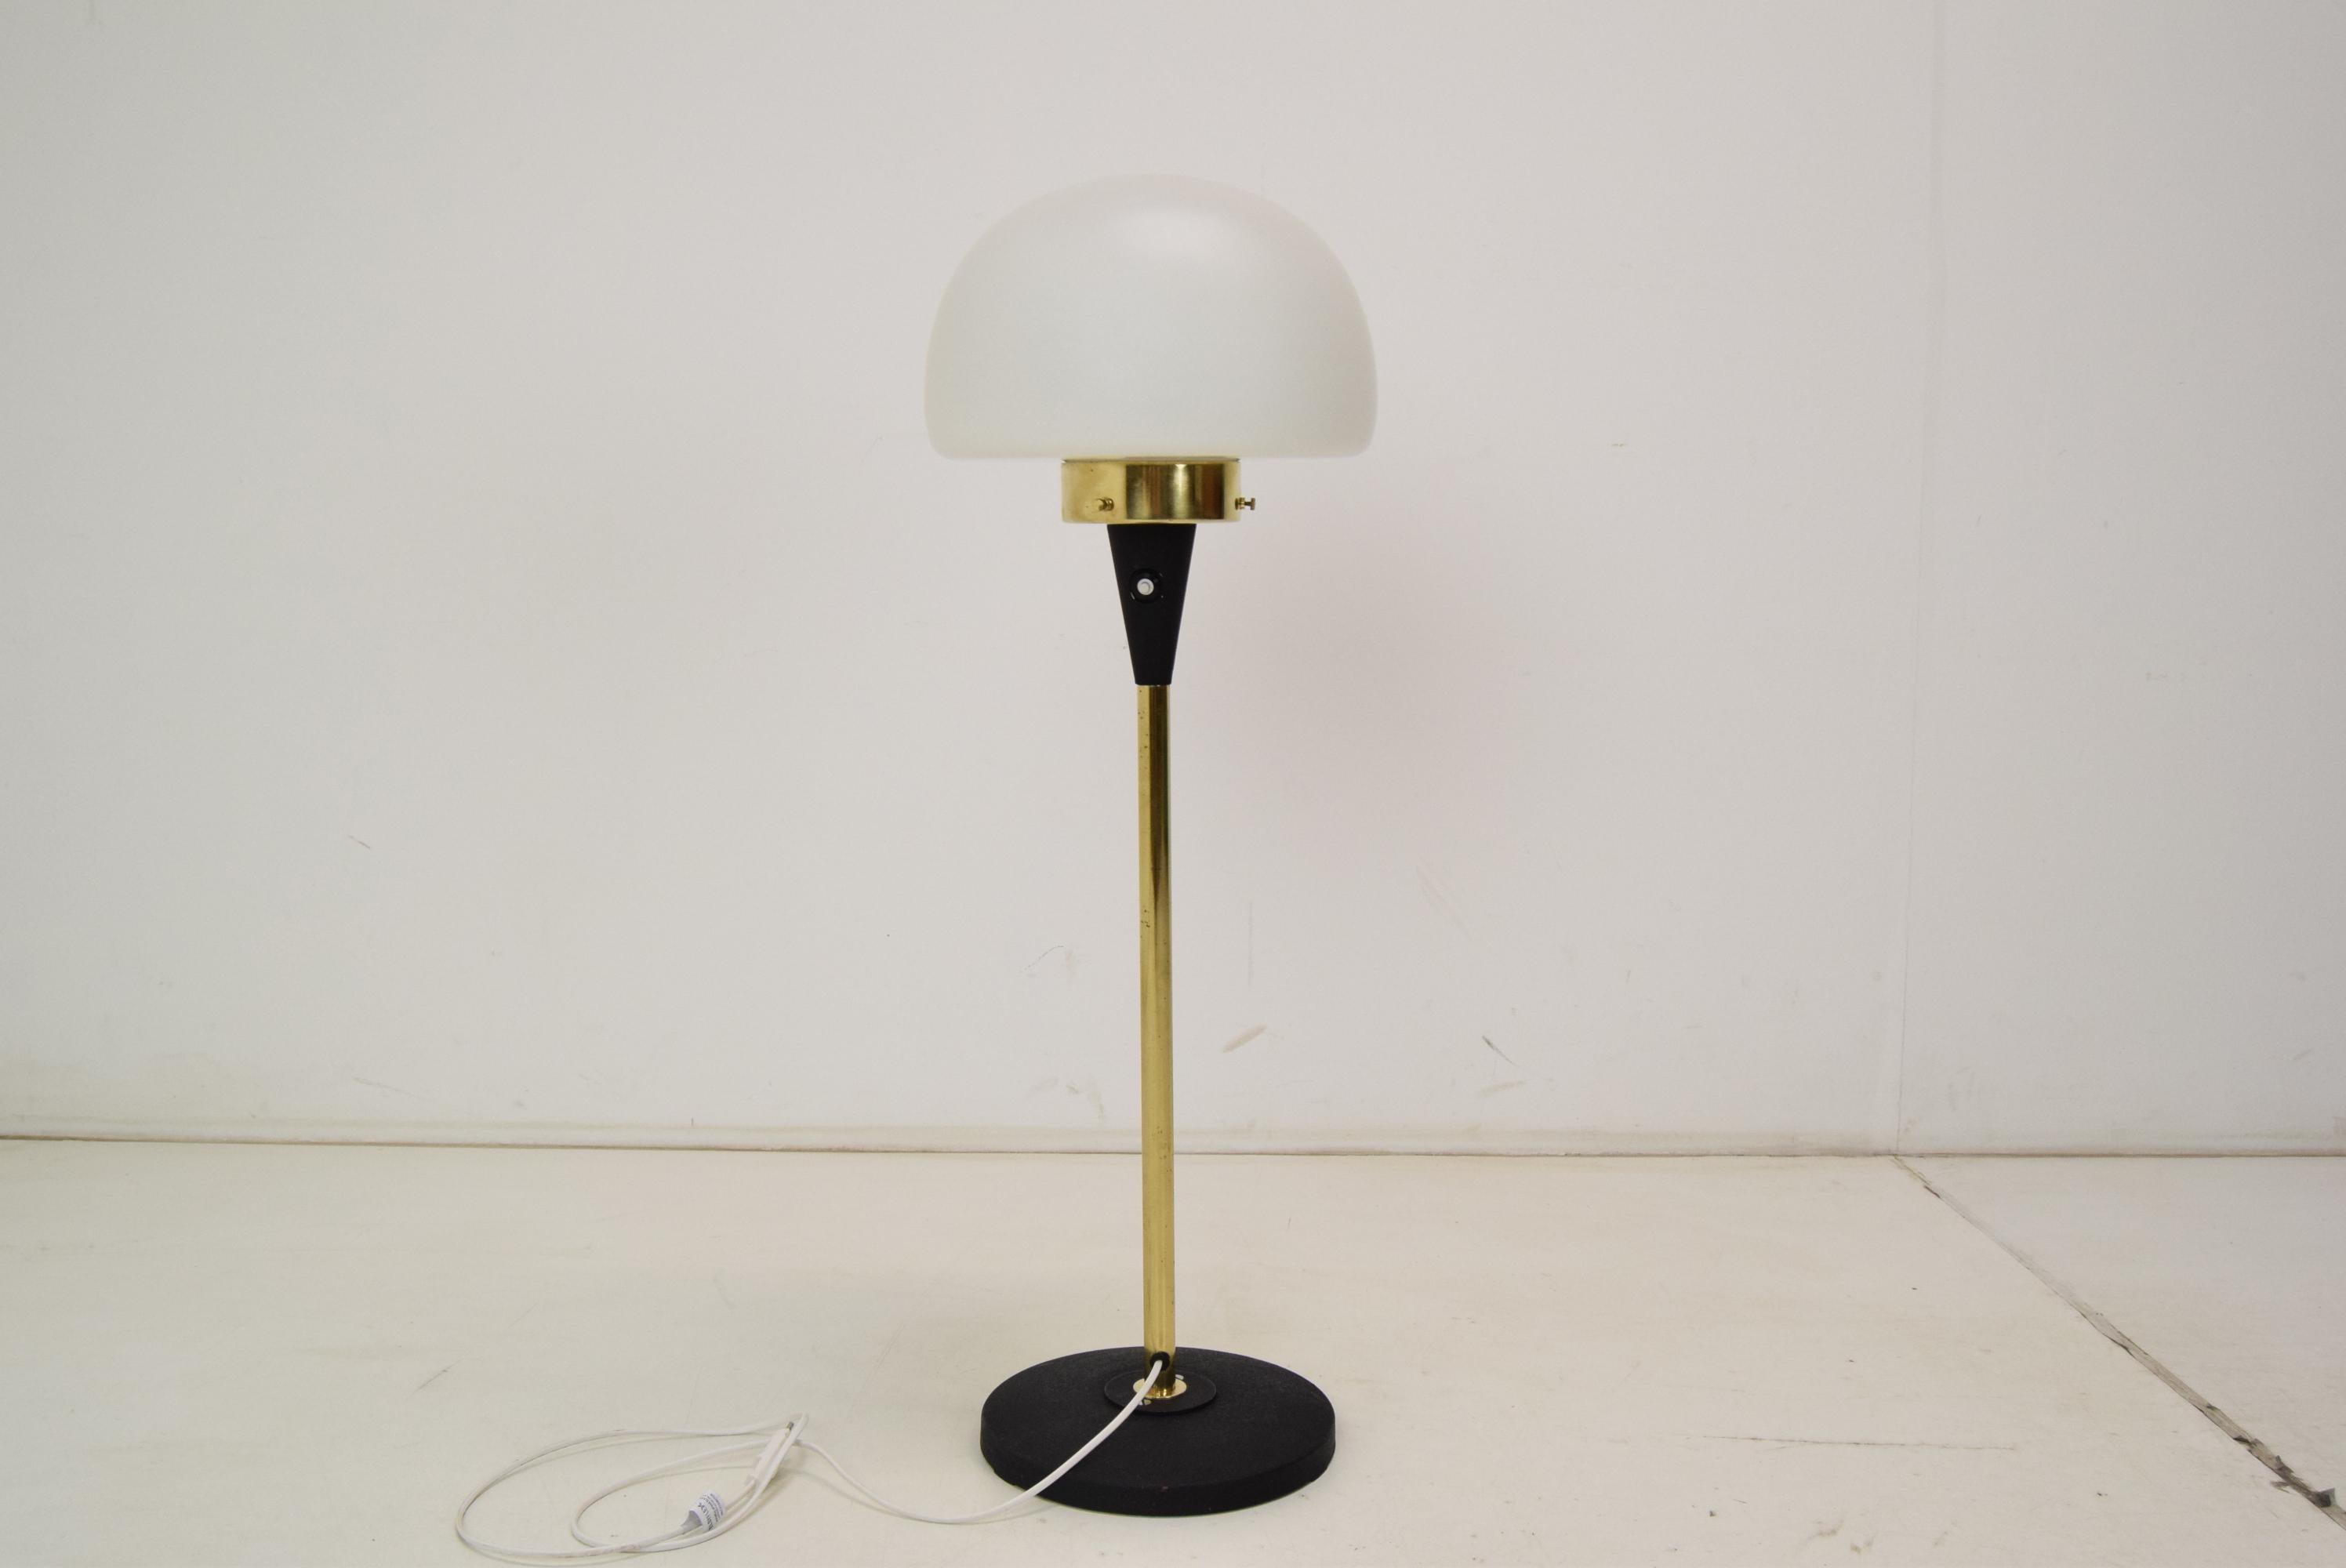 Made in Czechoslovakia
Made of Opaline Glass,Black metal basse,Brass rod witha aged patina
The lamp was completely disassembled and cleaned
It is equipped with a new electrical installation
40W,E27 or E26 bulb
US adapter included
Good Condition
